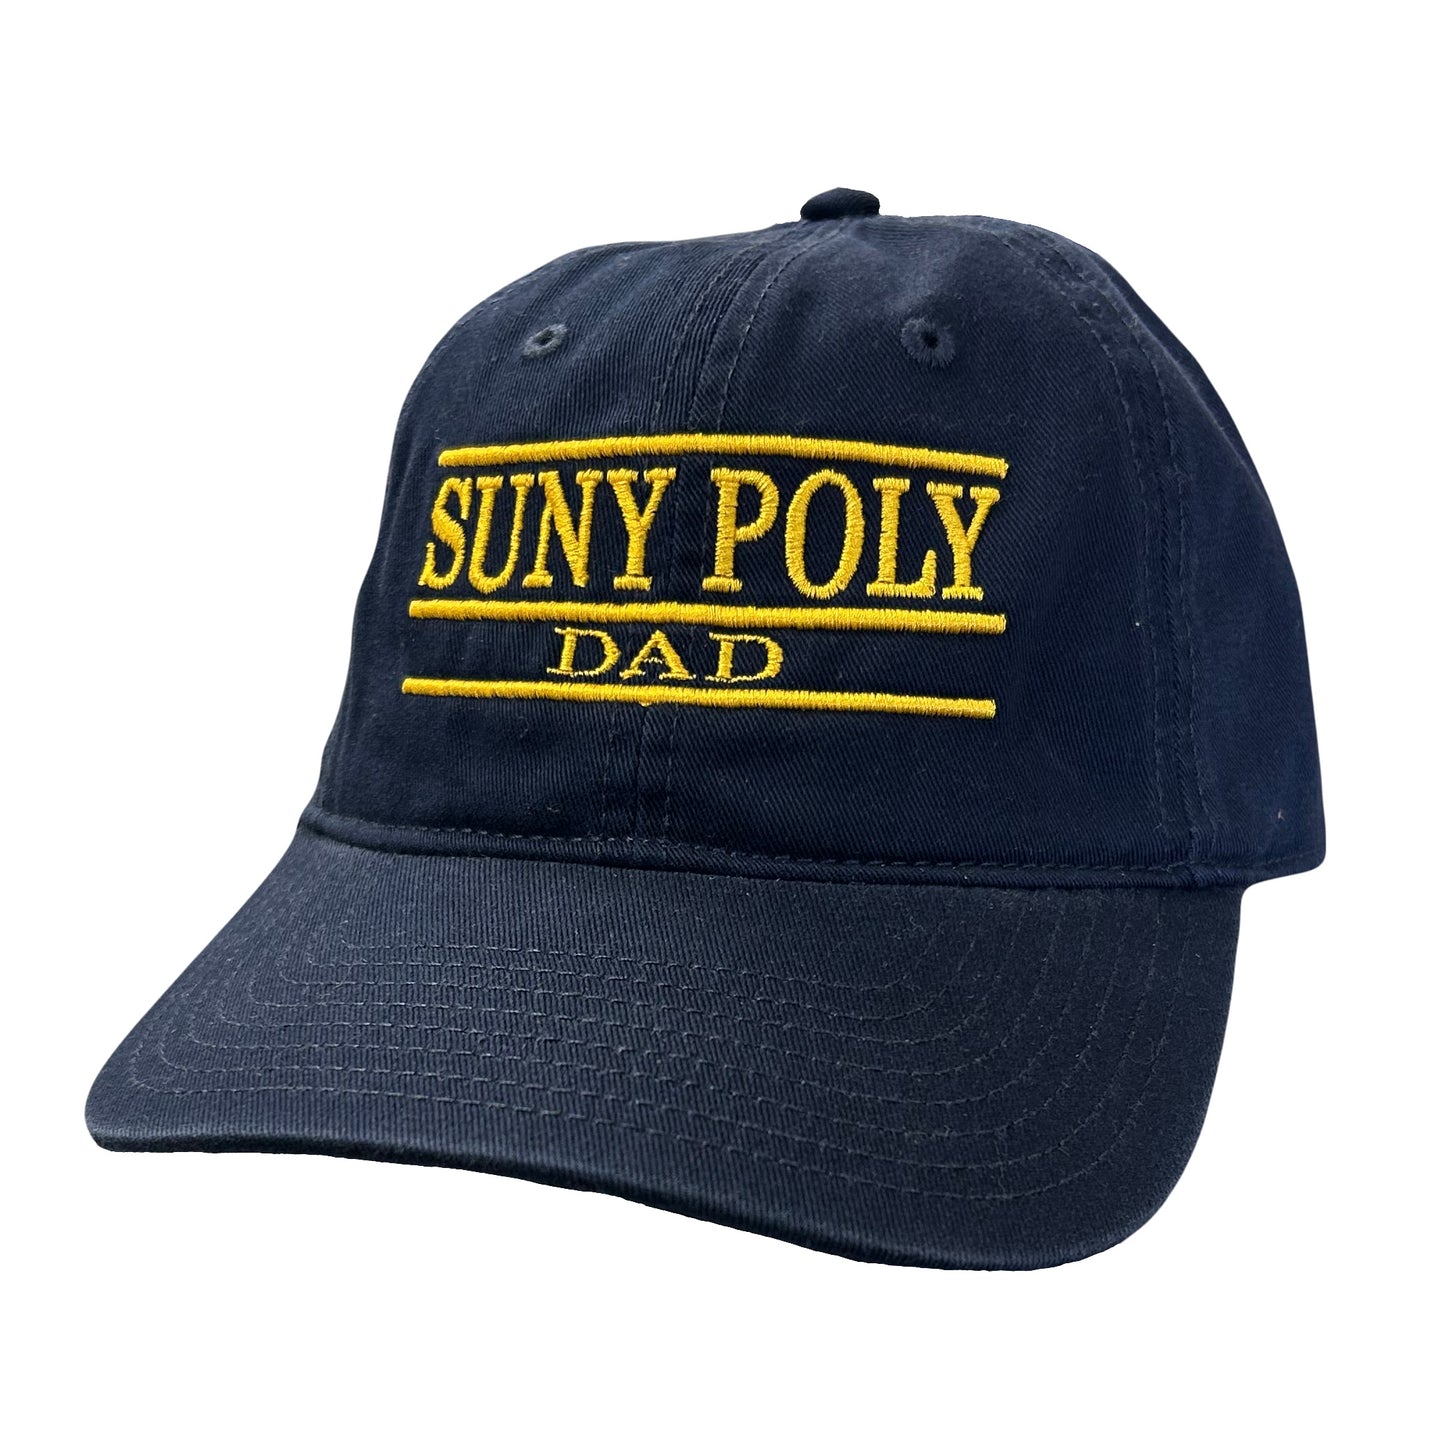 Classic Relaxed Twill Hat - Navy SUNY Poly Dad